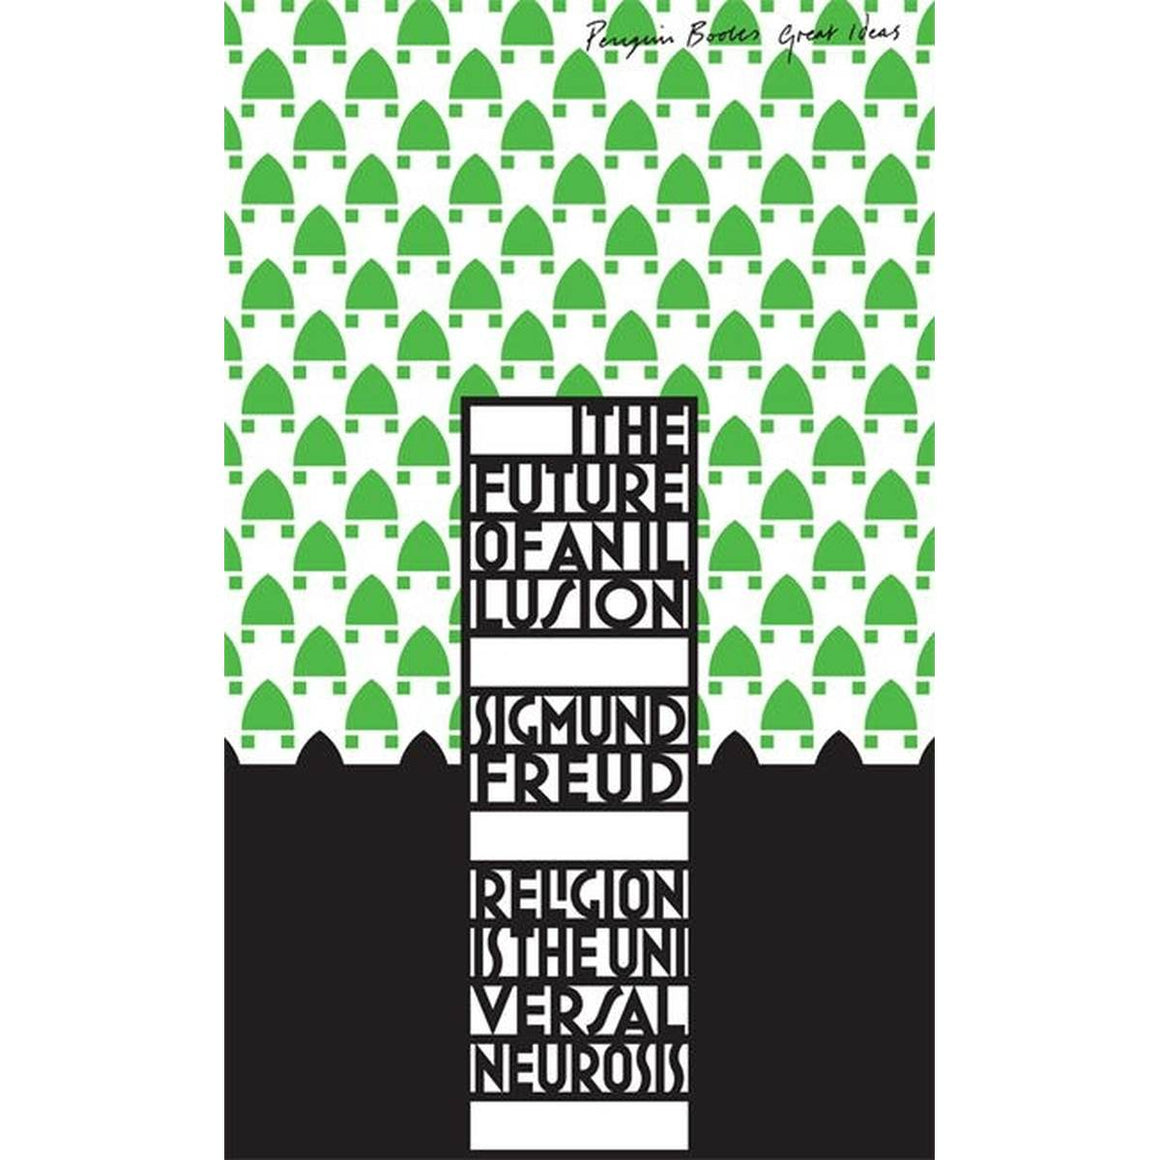 Book cover of ‘The future of an illusion’ in an Art Deco black font against a white and green Art Deco pattern background with a solid black block on the bottom third. 